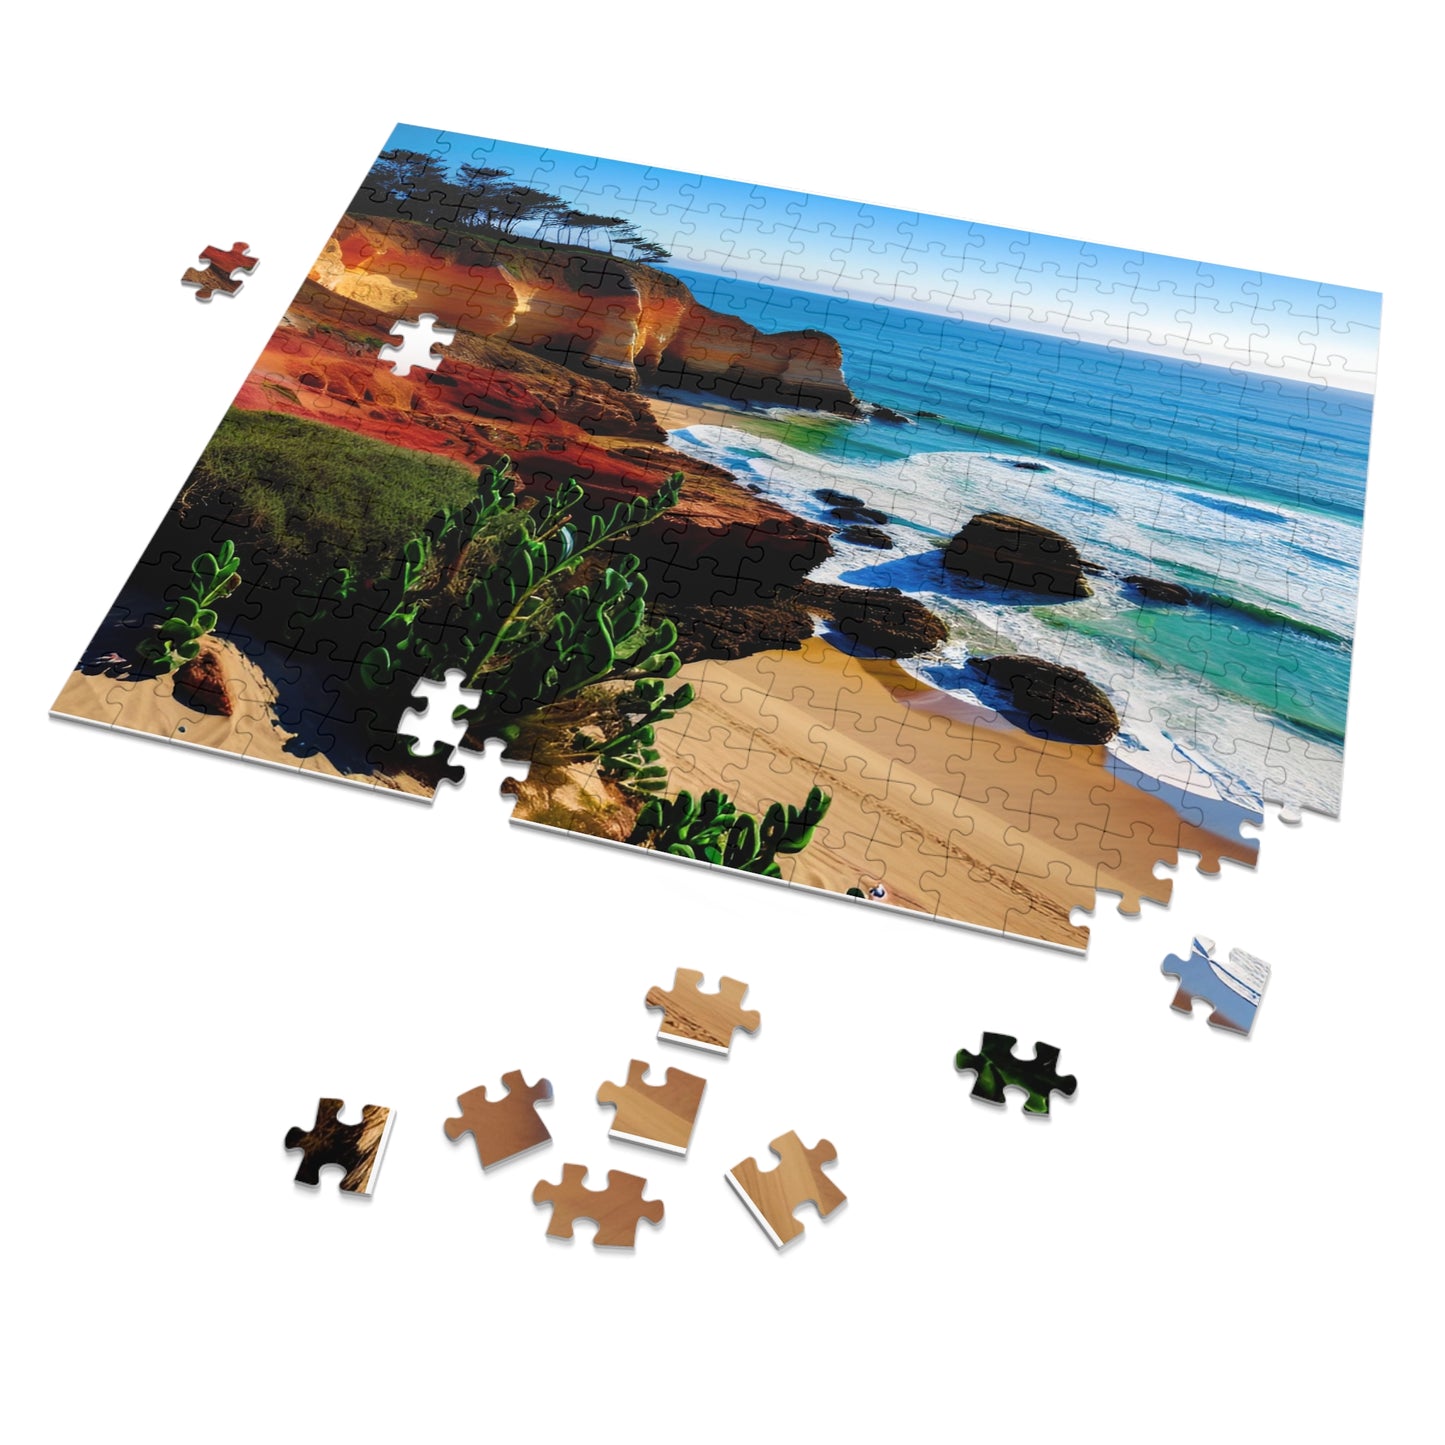 Family Crystal Cove Jigsaw Puzzle, 252-Piece